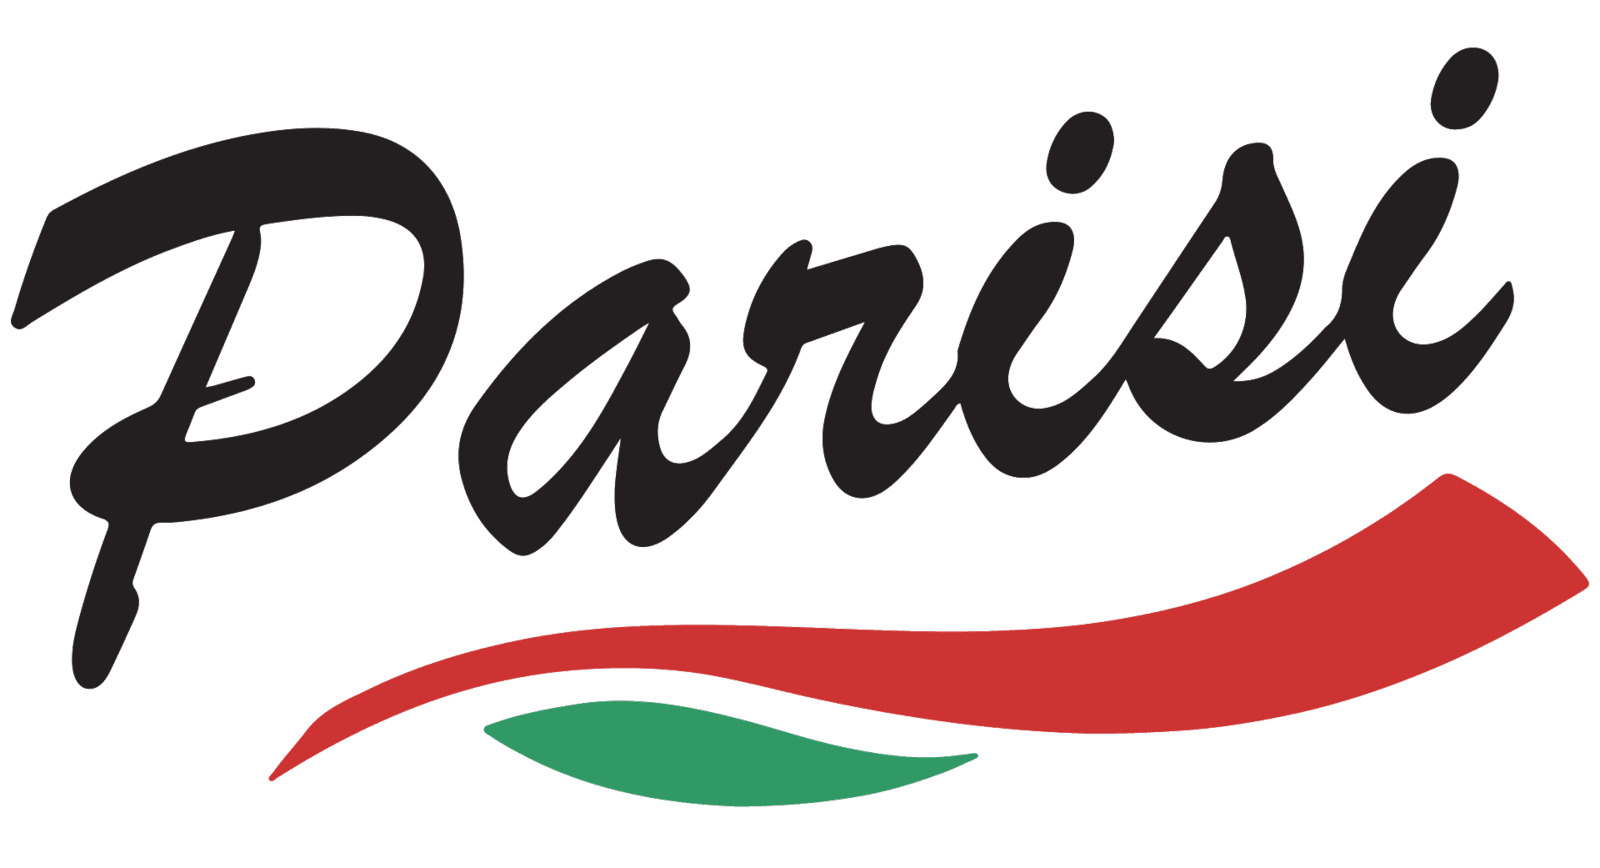 The Parisi Logo, a brand associated with eboil systems